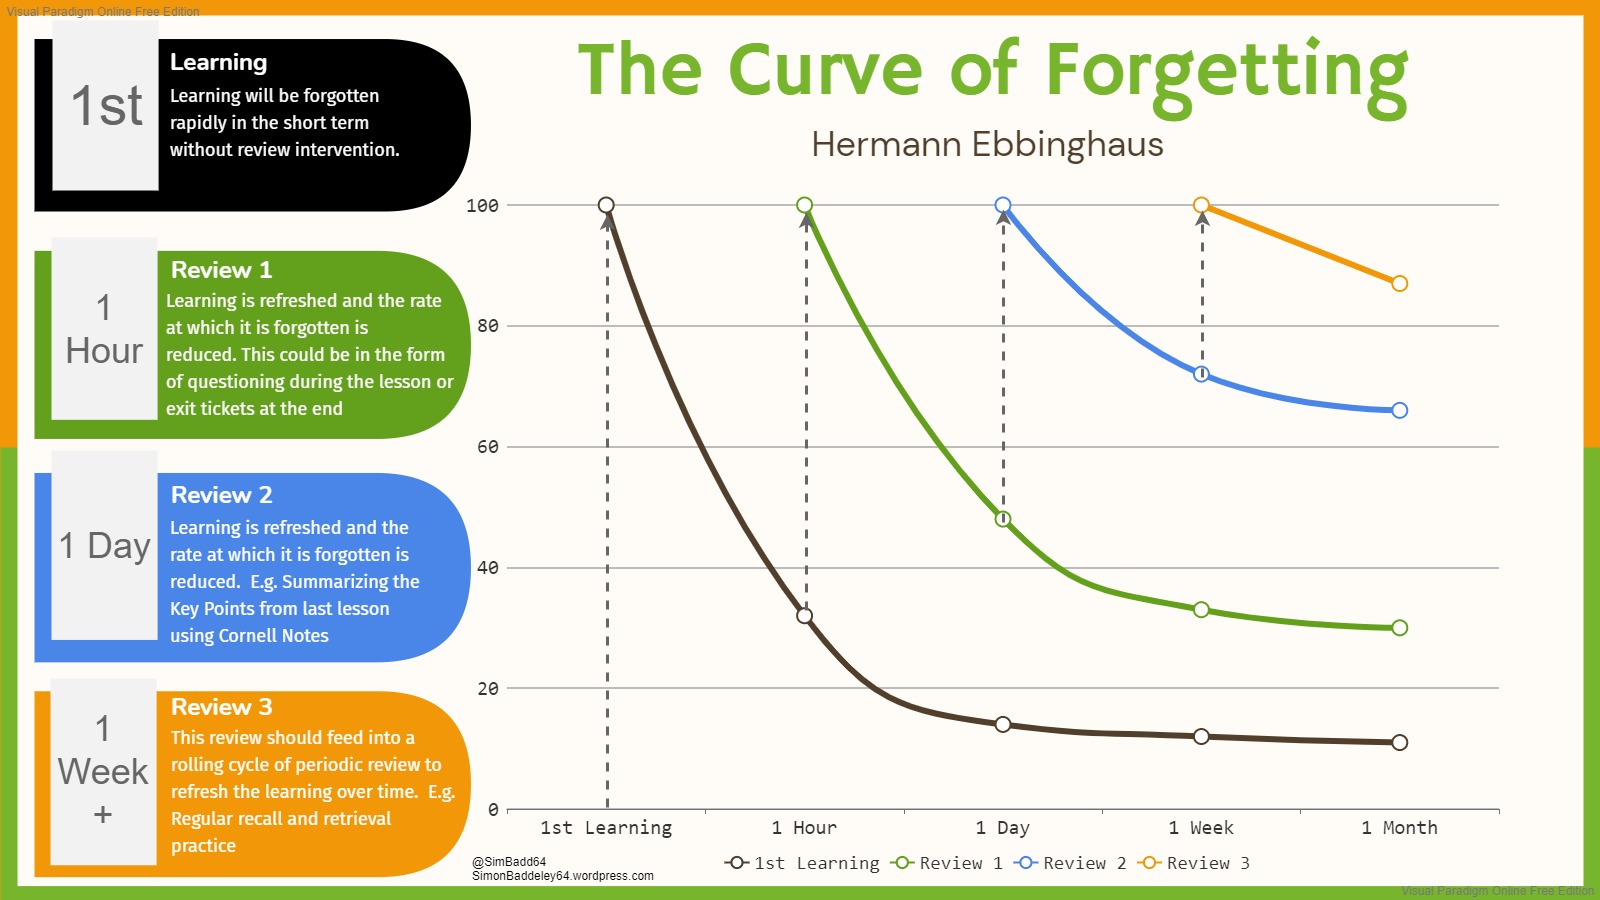 The Curve of Forgetting – SimonBaddeley64